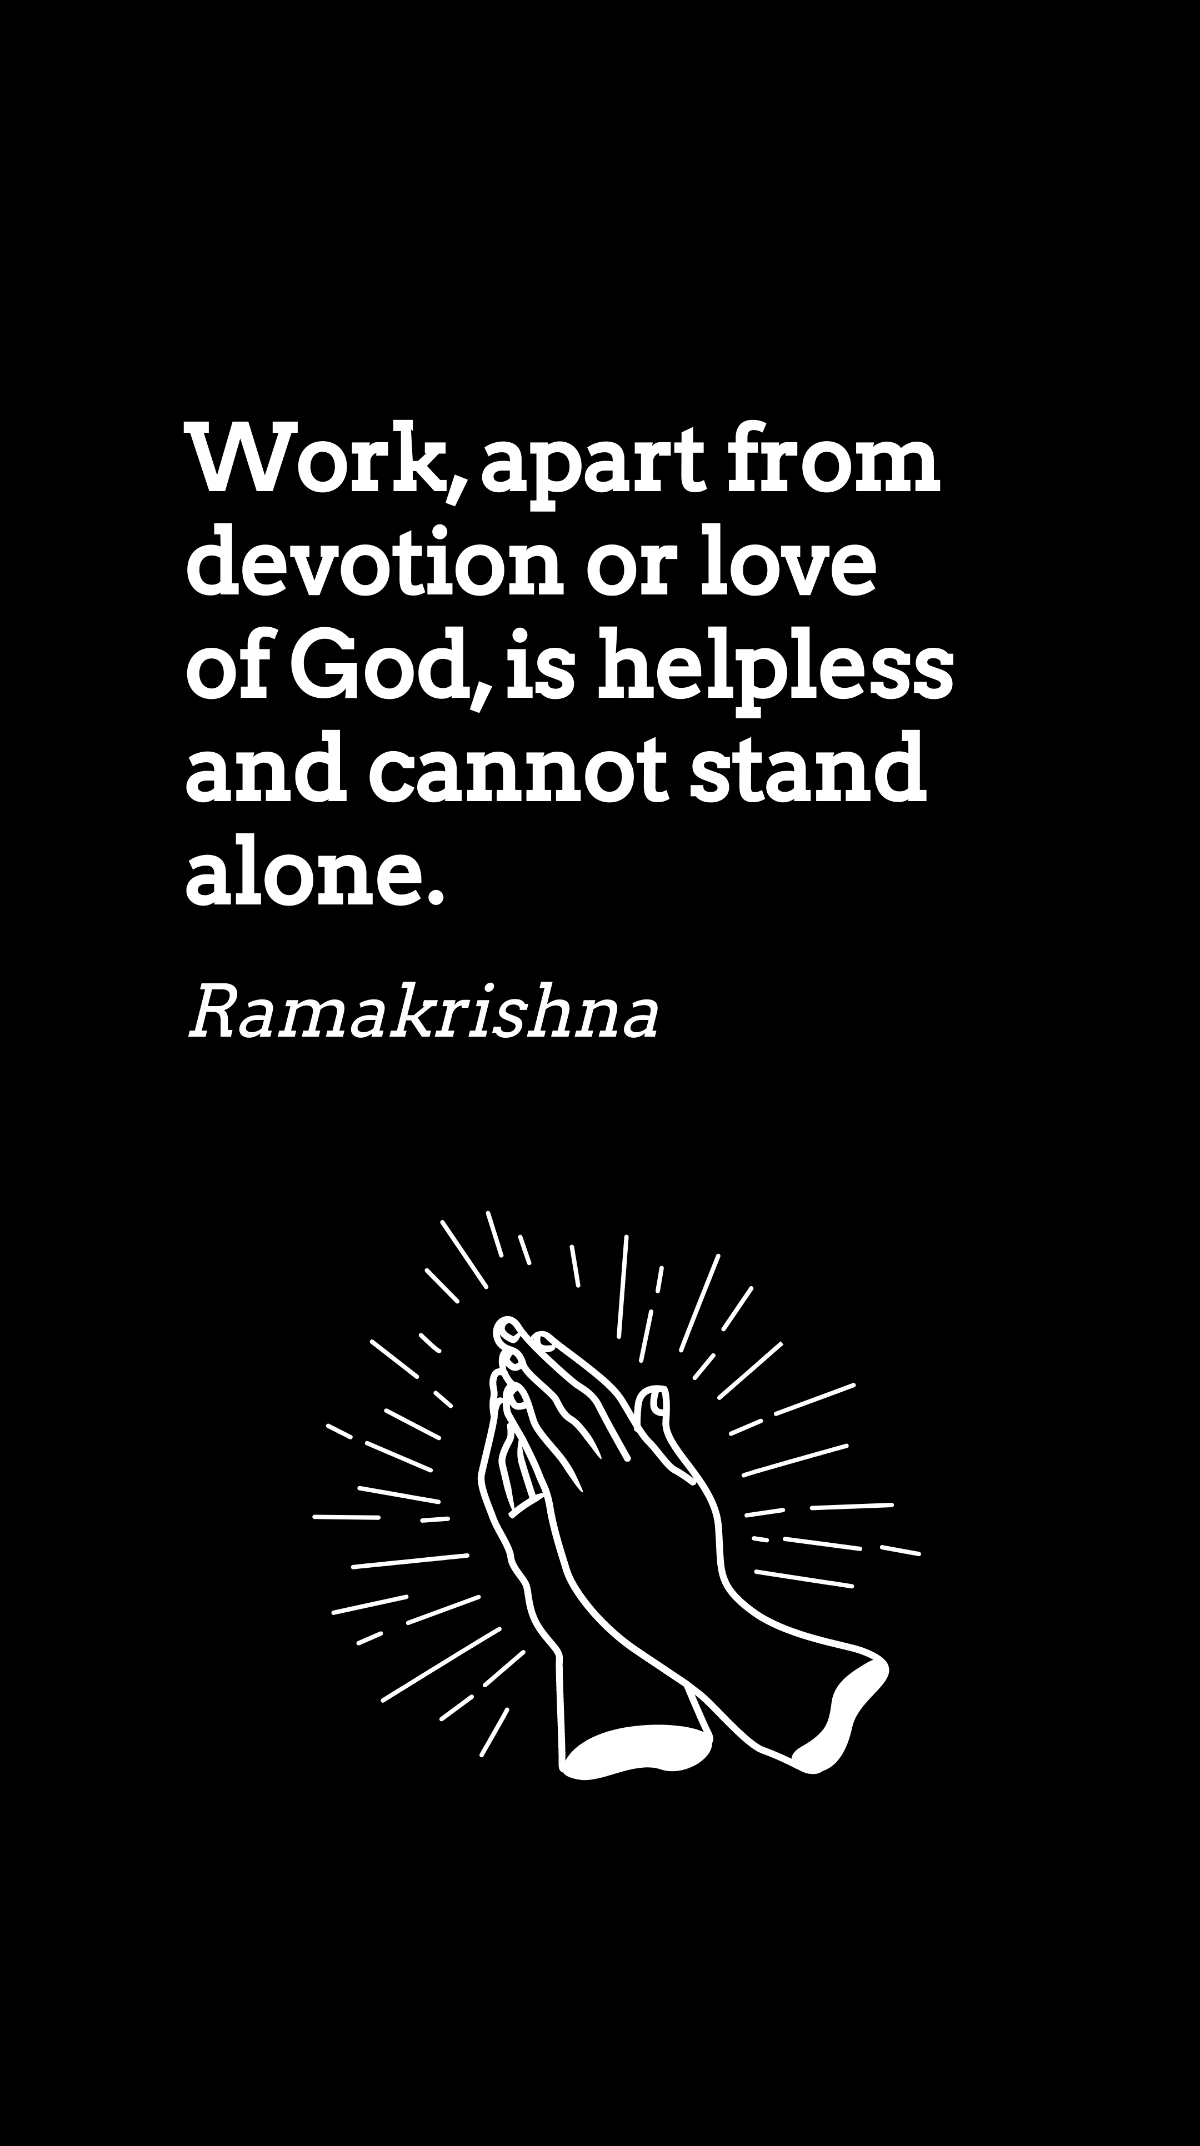 Ramakrishna - Work, apart from devotion or love of God, is helpless and cannot stand alone.